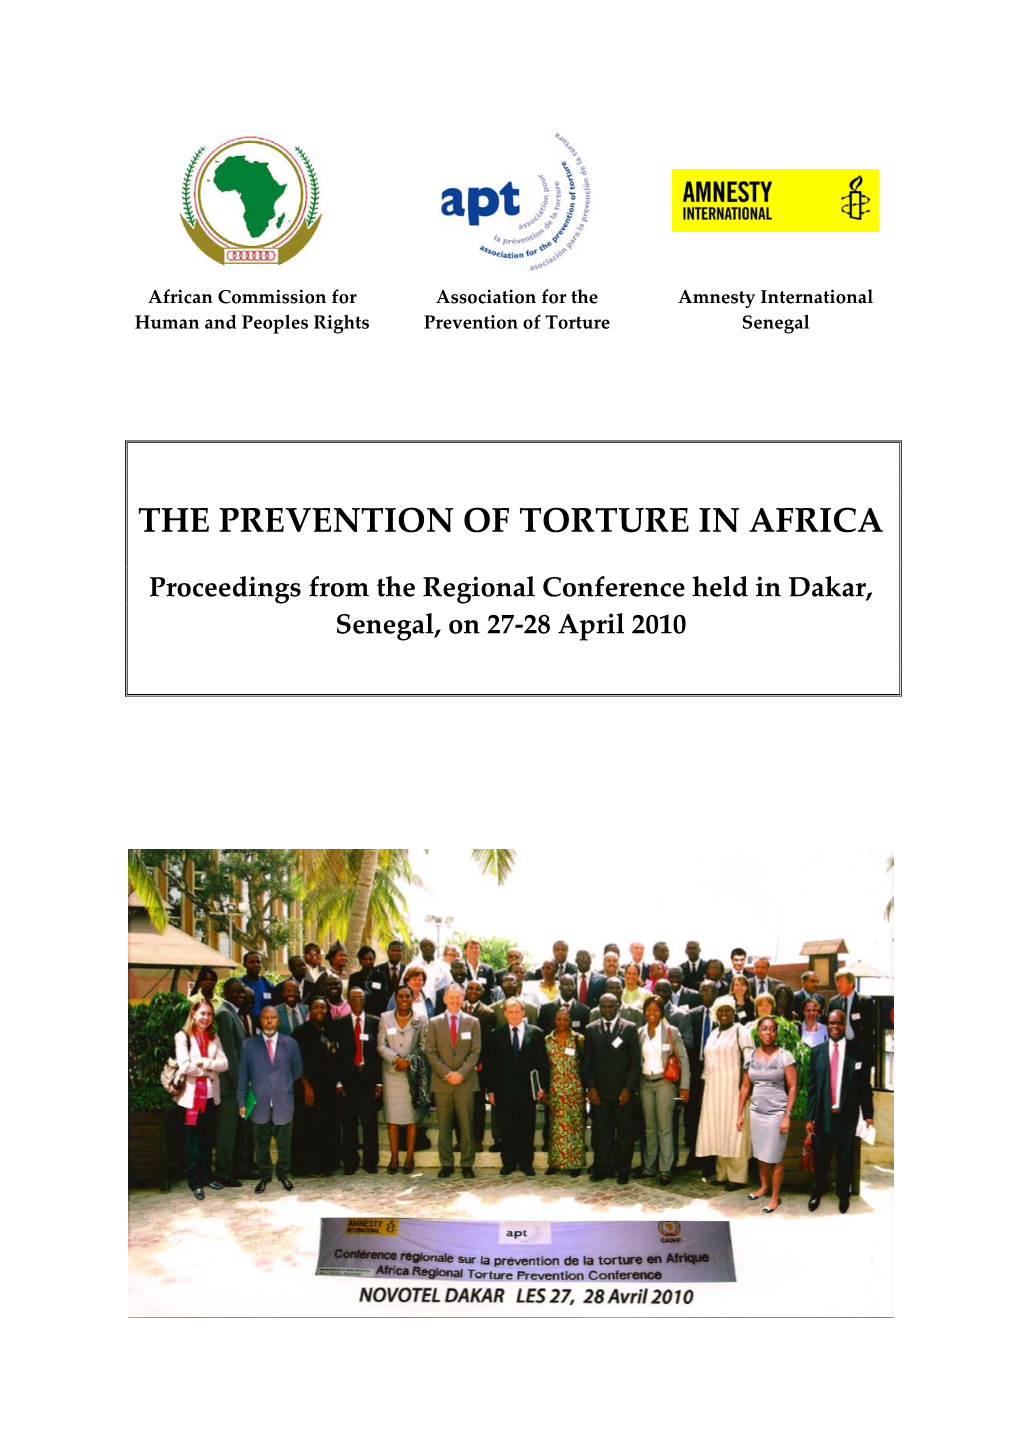 The Prevention of Torture in Africa